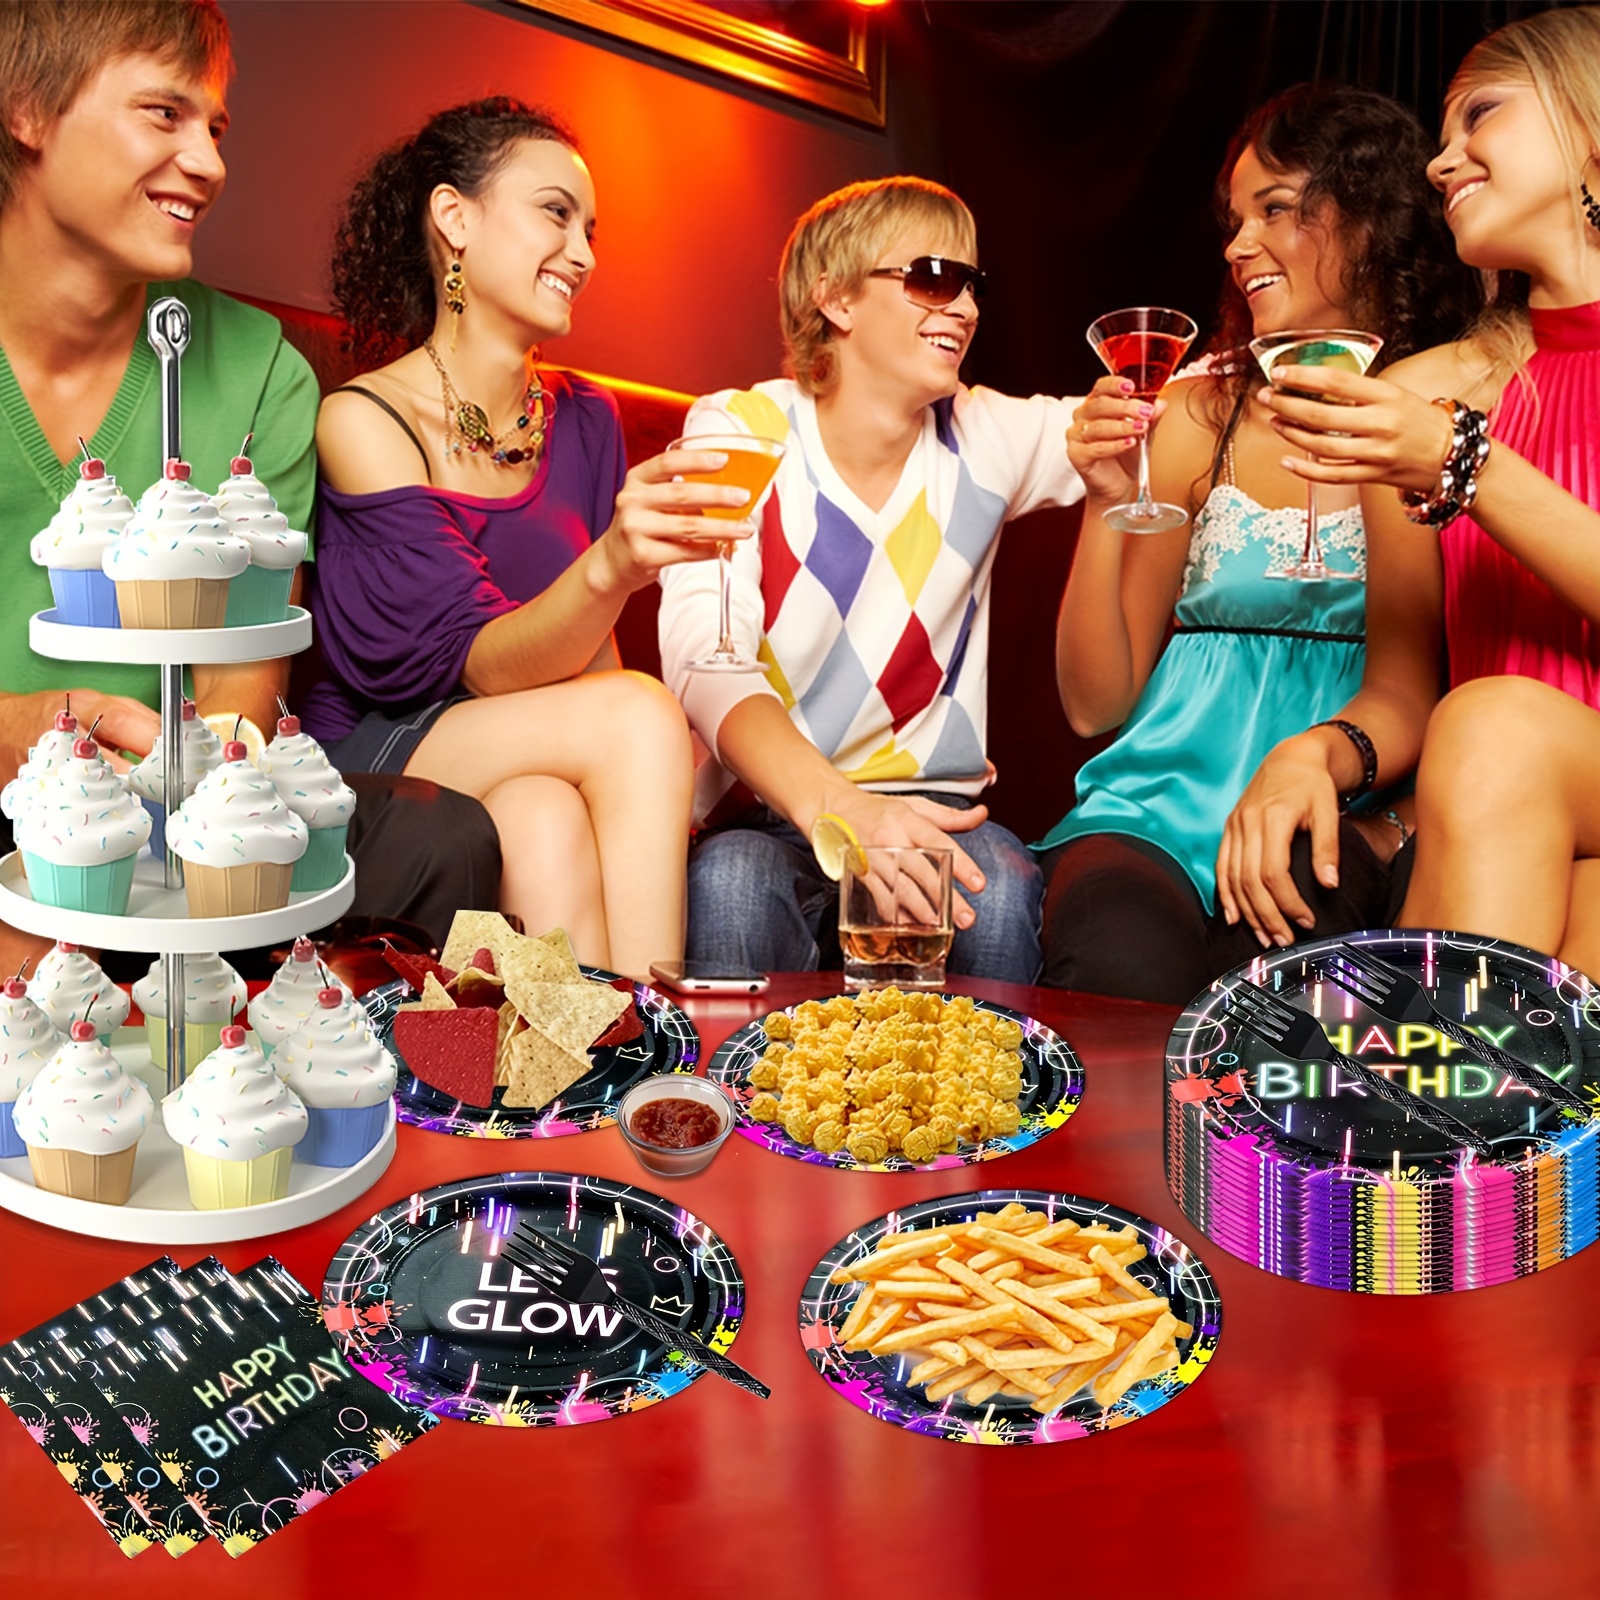 Let's Glow Party Supplies Neon Tableware Paper Plate Cup Napkin